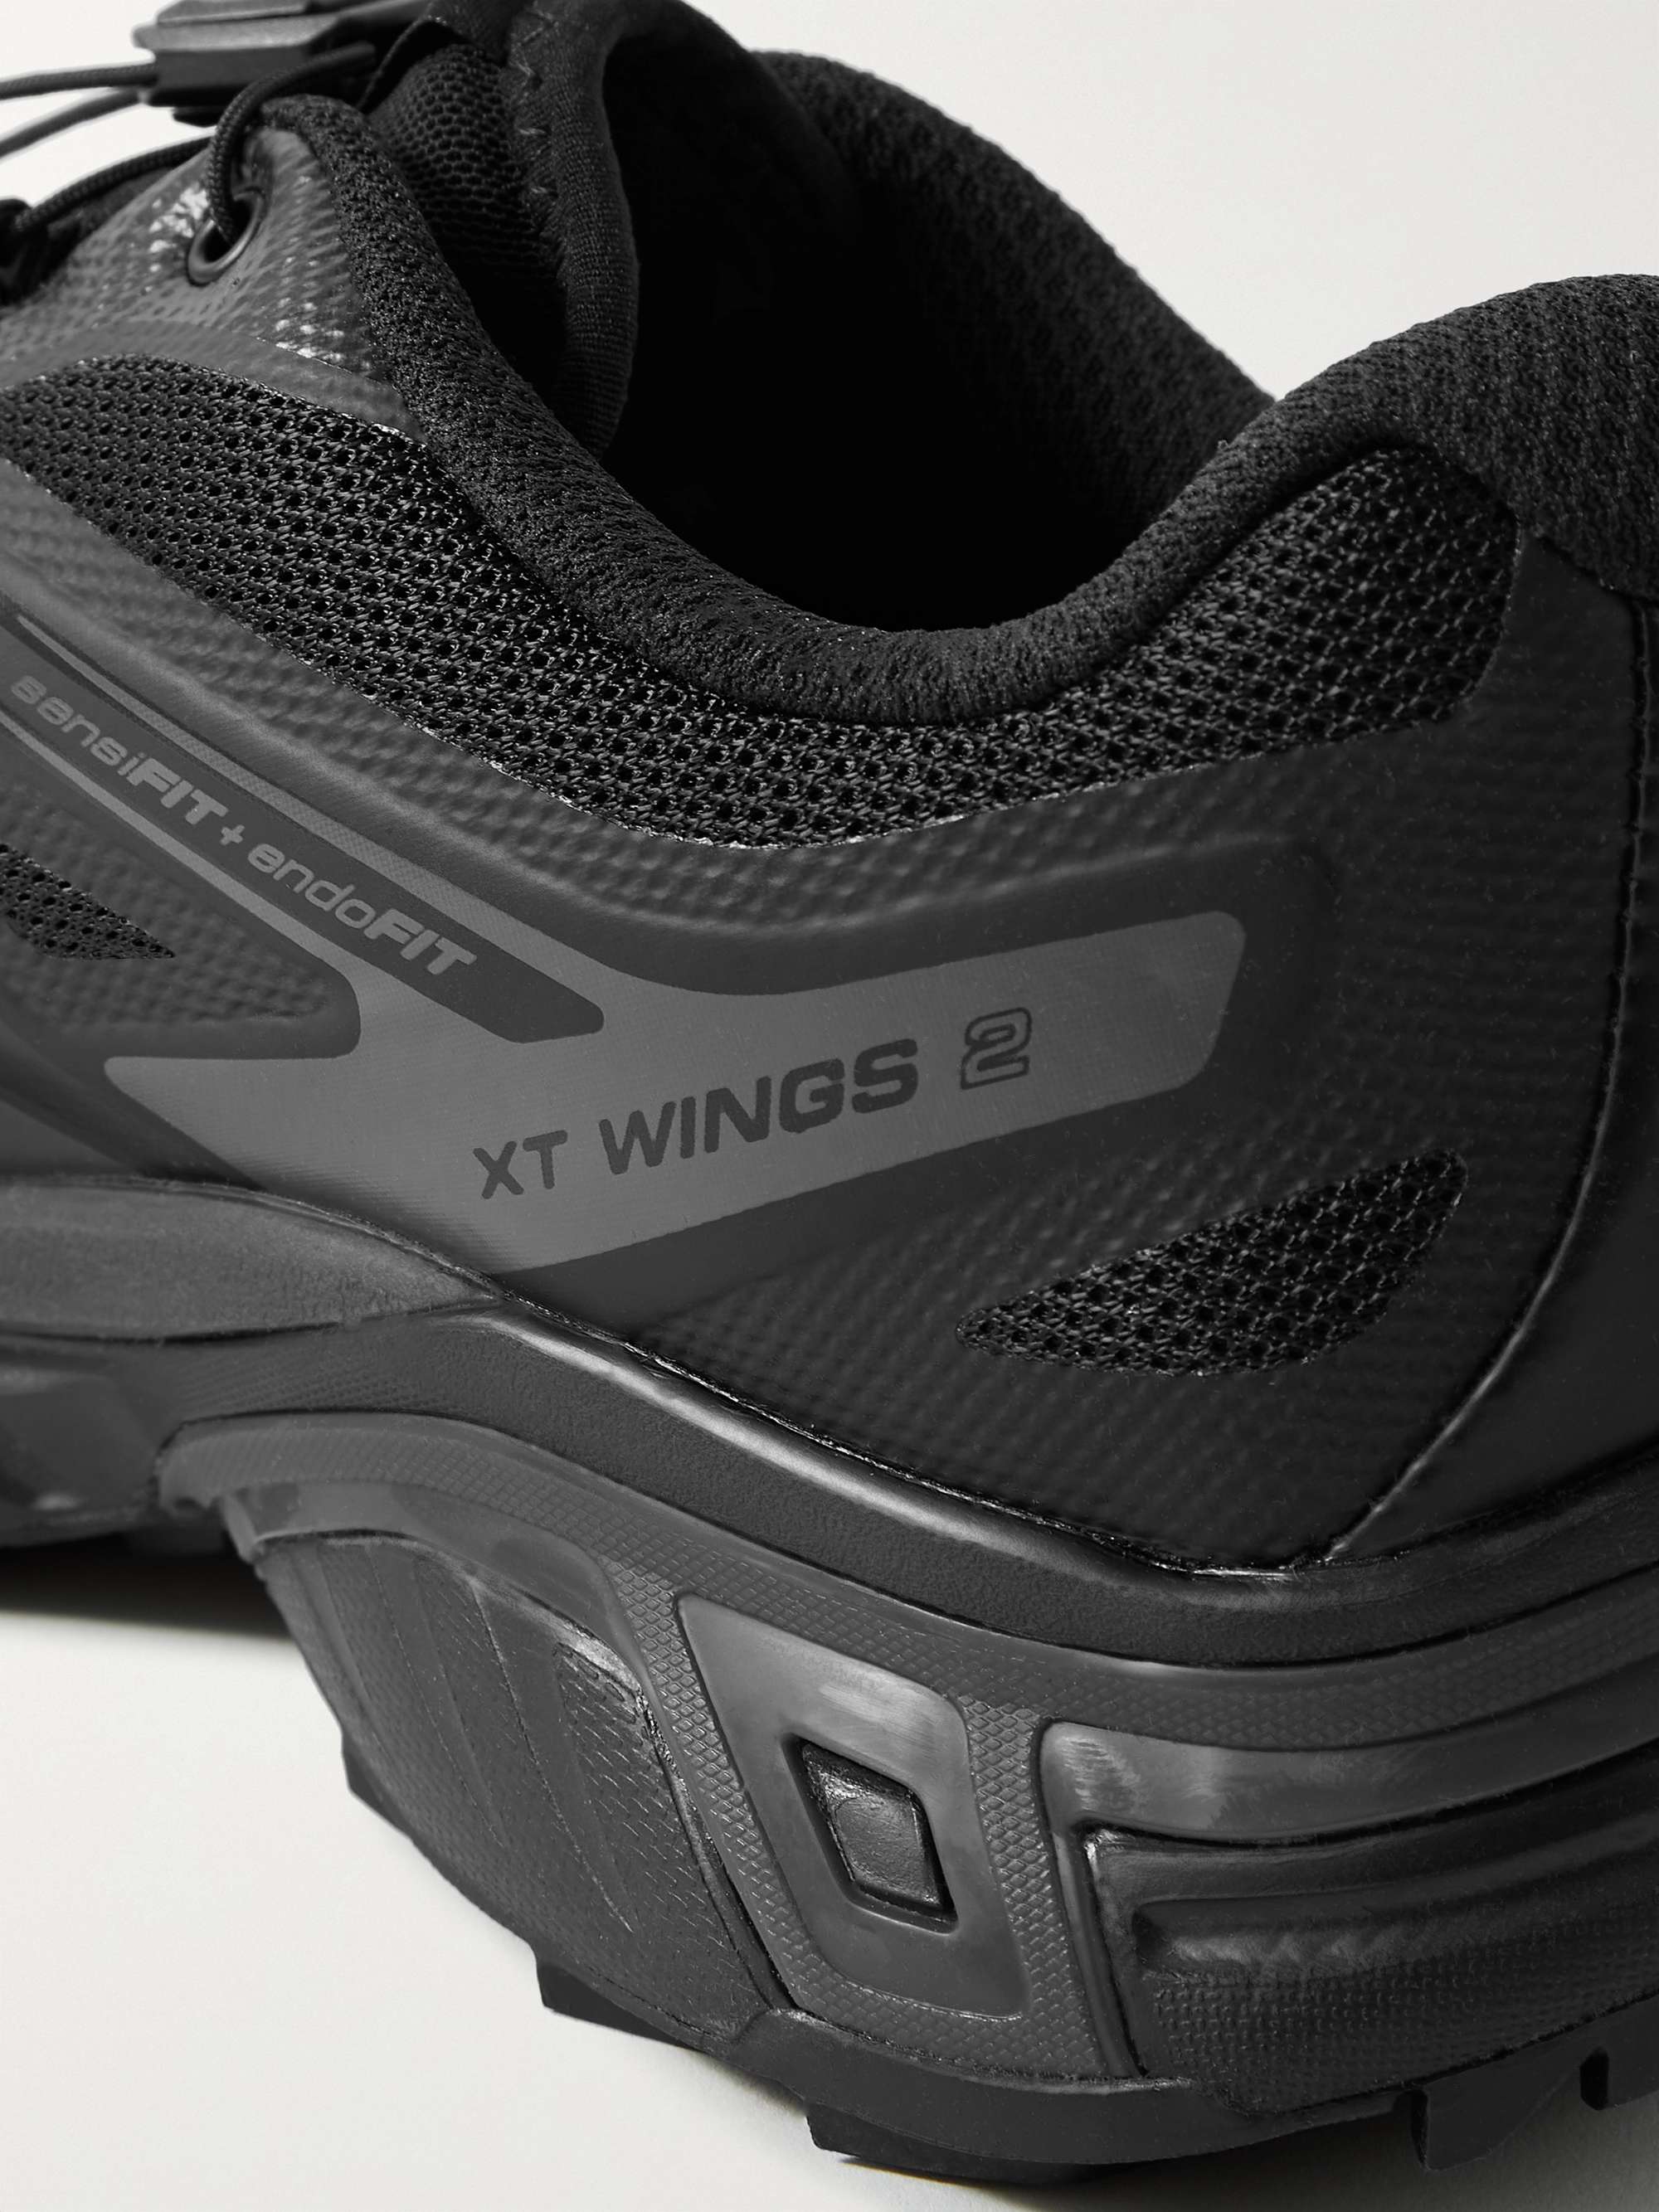 XT-Wings 2 ADV Mesh and Rubber Running Shoes